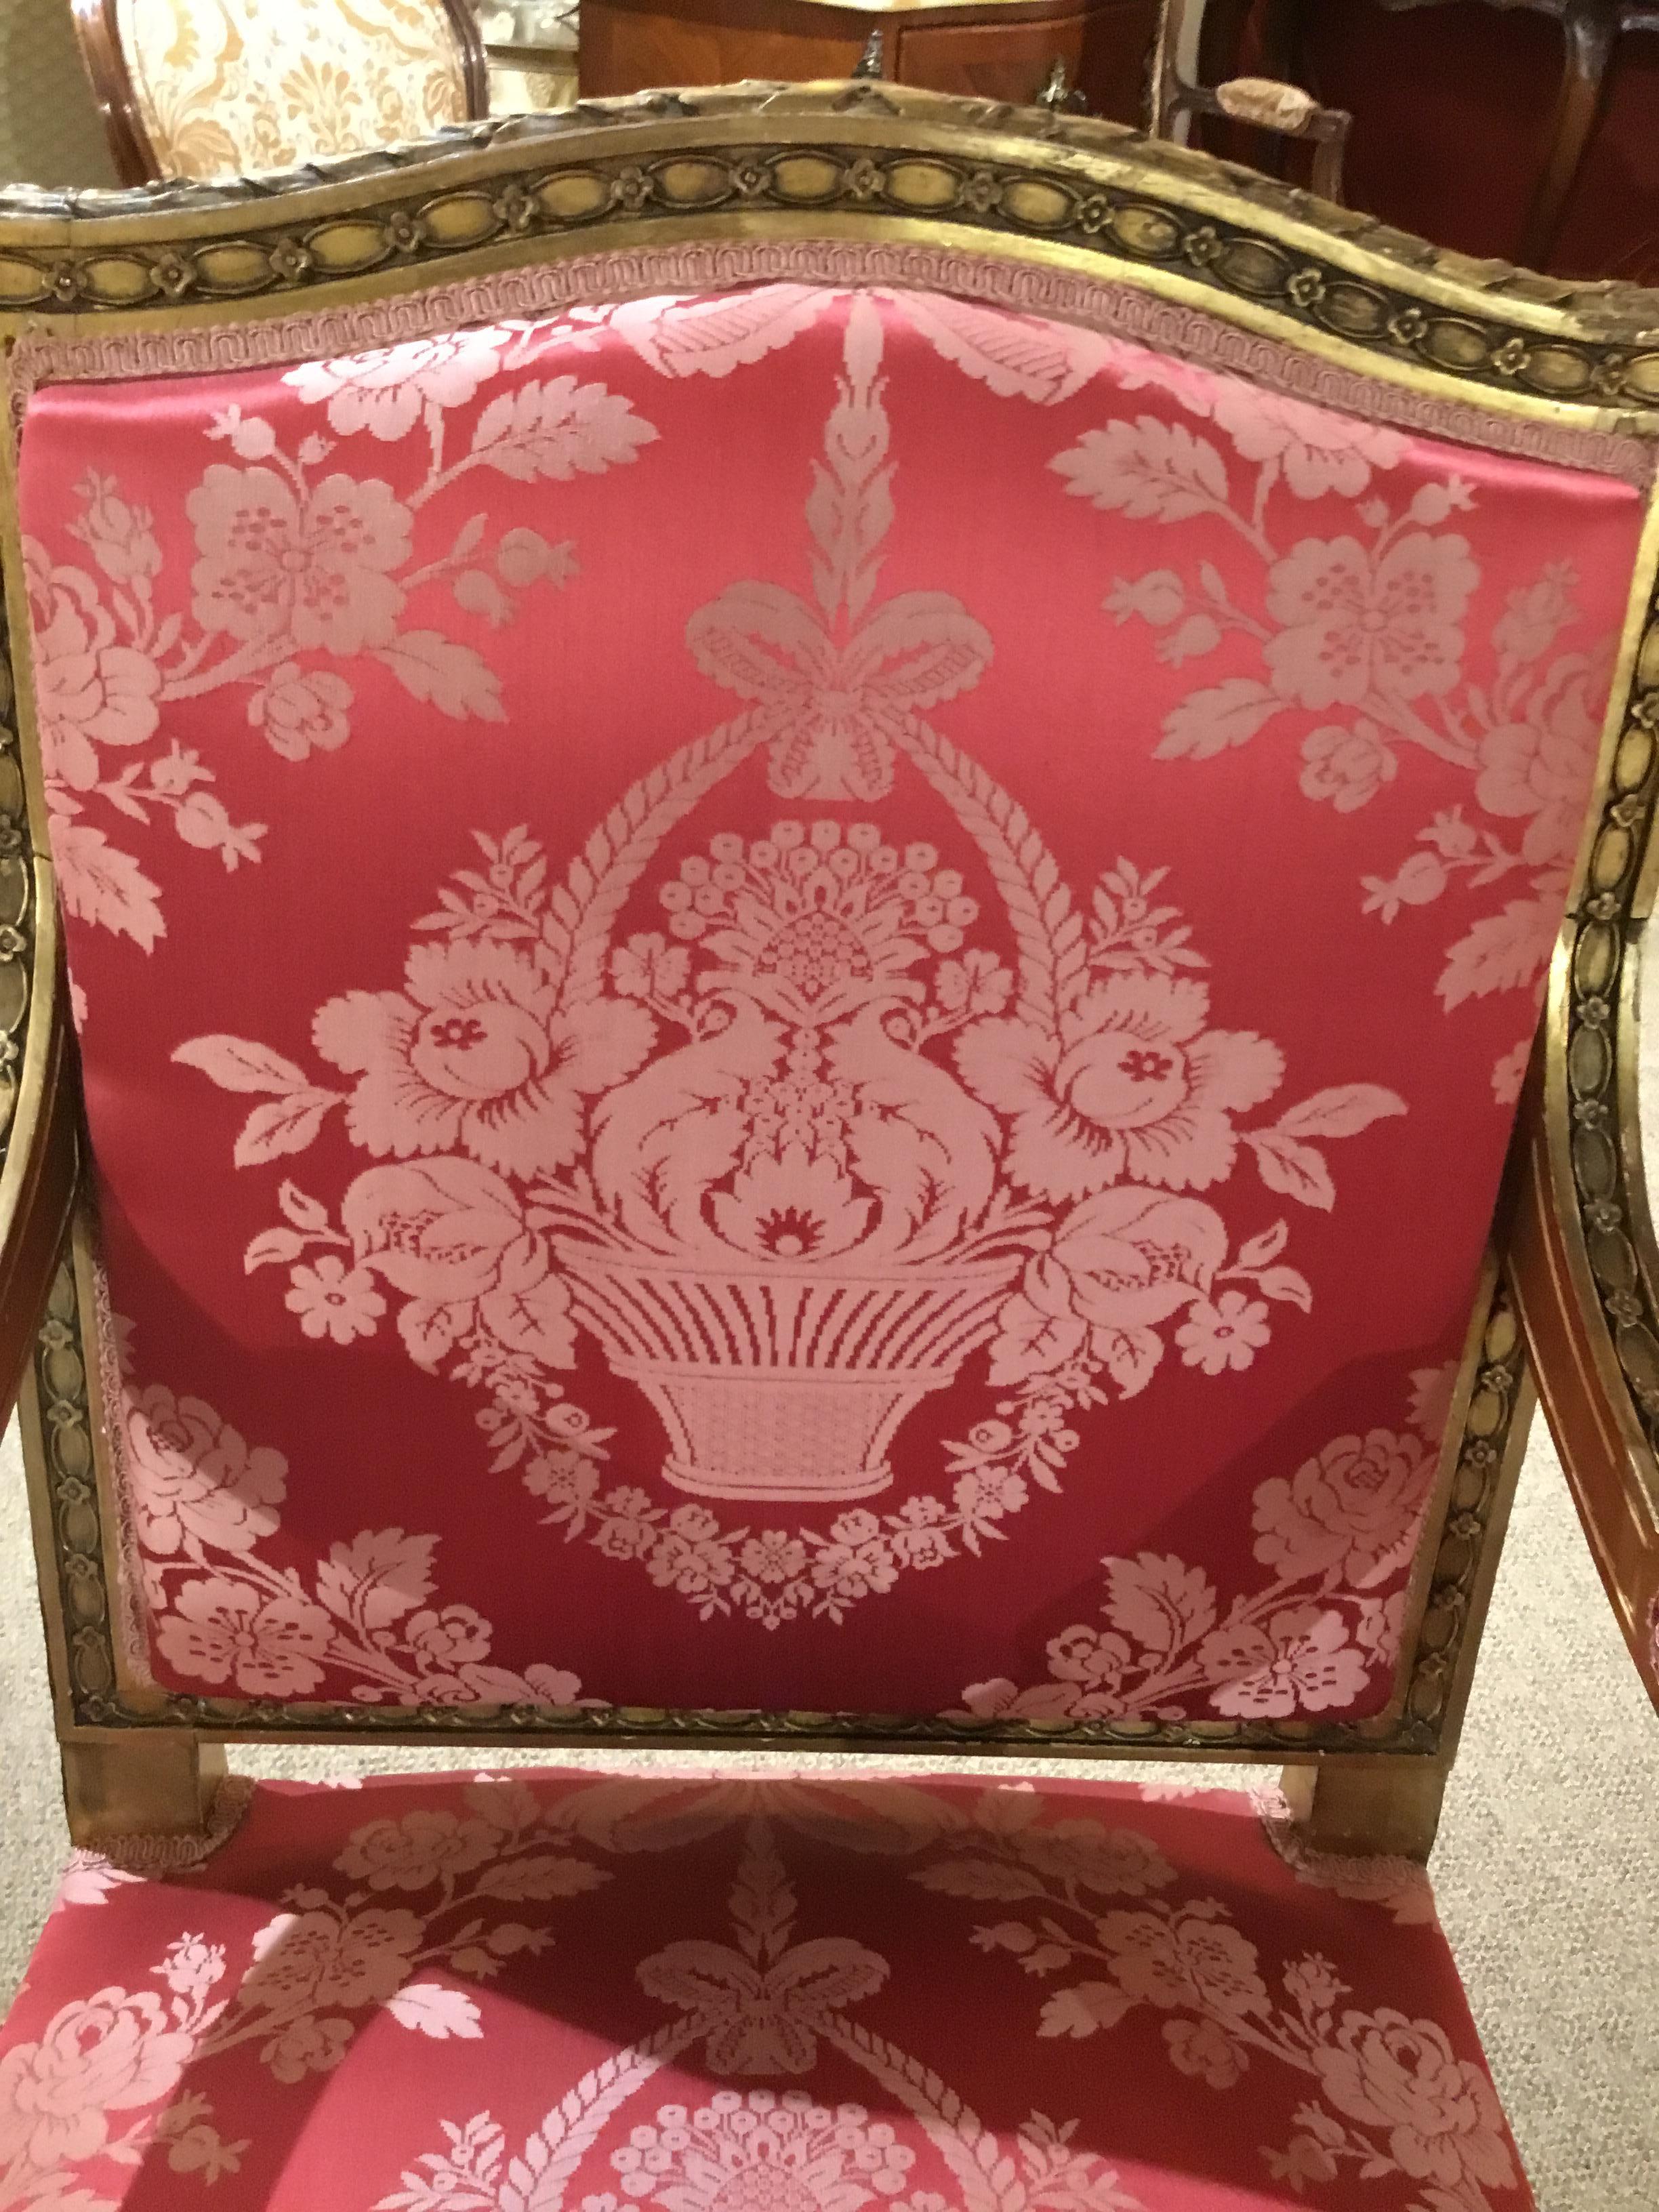 Lovely pair of Louis XVI style armchairs with square back with slight oval at the center back. The gilt finish in soft gold patina.
Upholstered in silk rose damask. Fabric without spots or problems. The front
Legs have a squared tapered leg with a